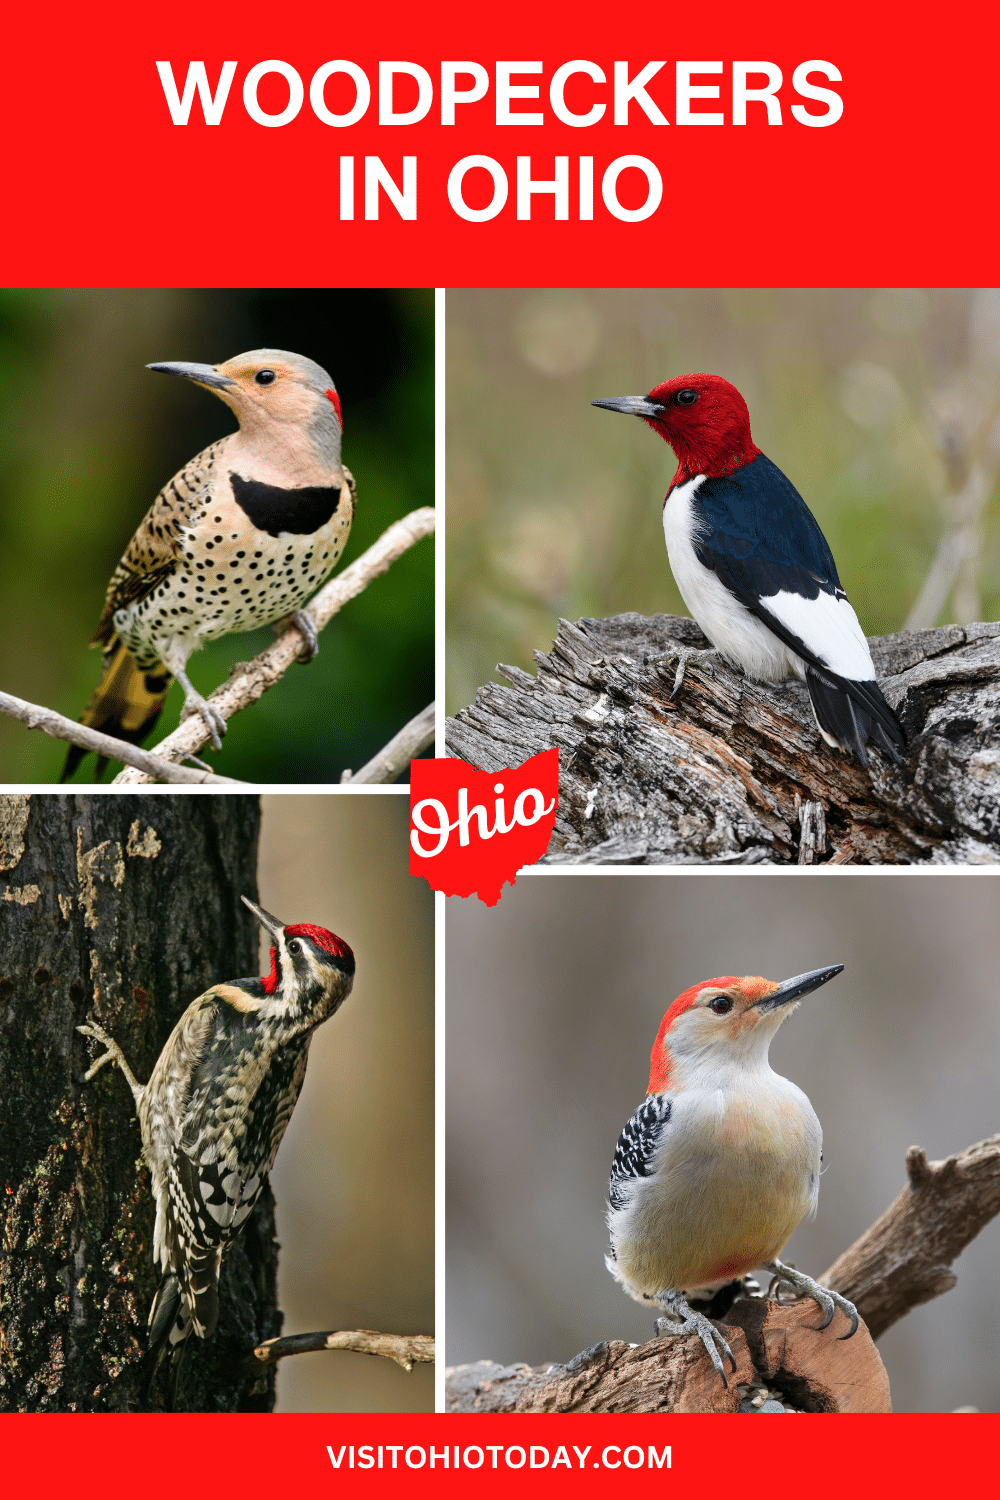 There are seven common species of woodpeckers in Ohio. You will likely spot woodpeckers in every part of the state, in parks, along trails, and even in the backyard on the birdfeeder!